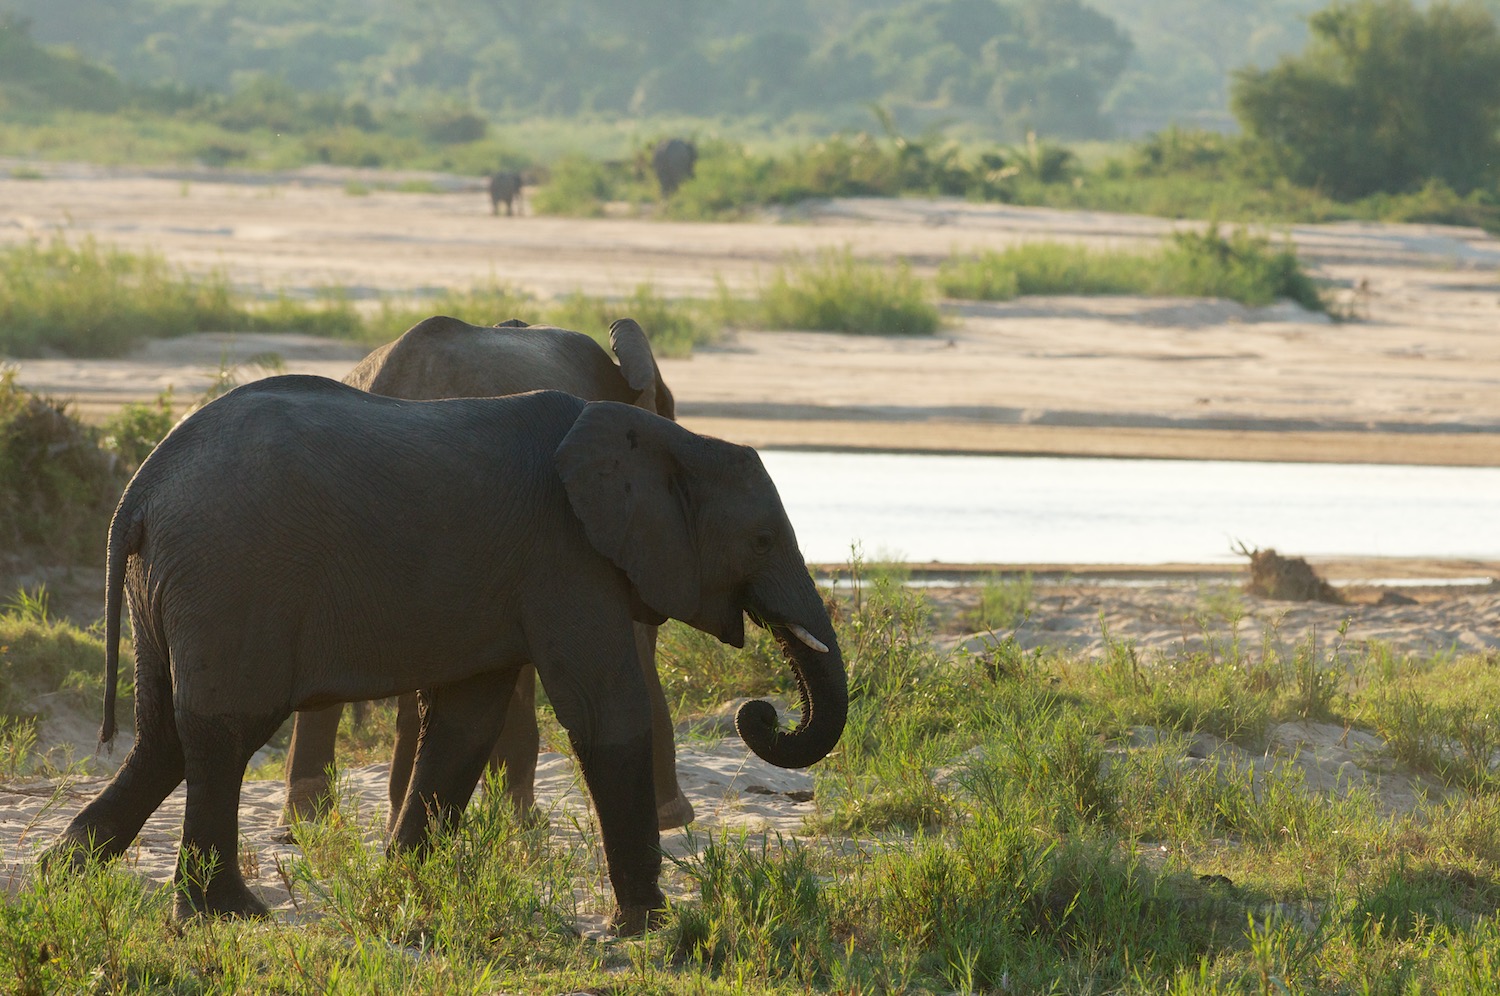 Elephants by the Sand River